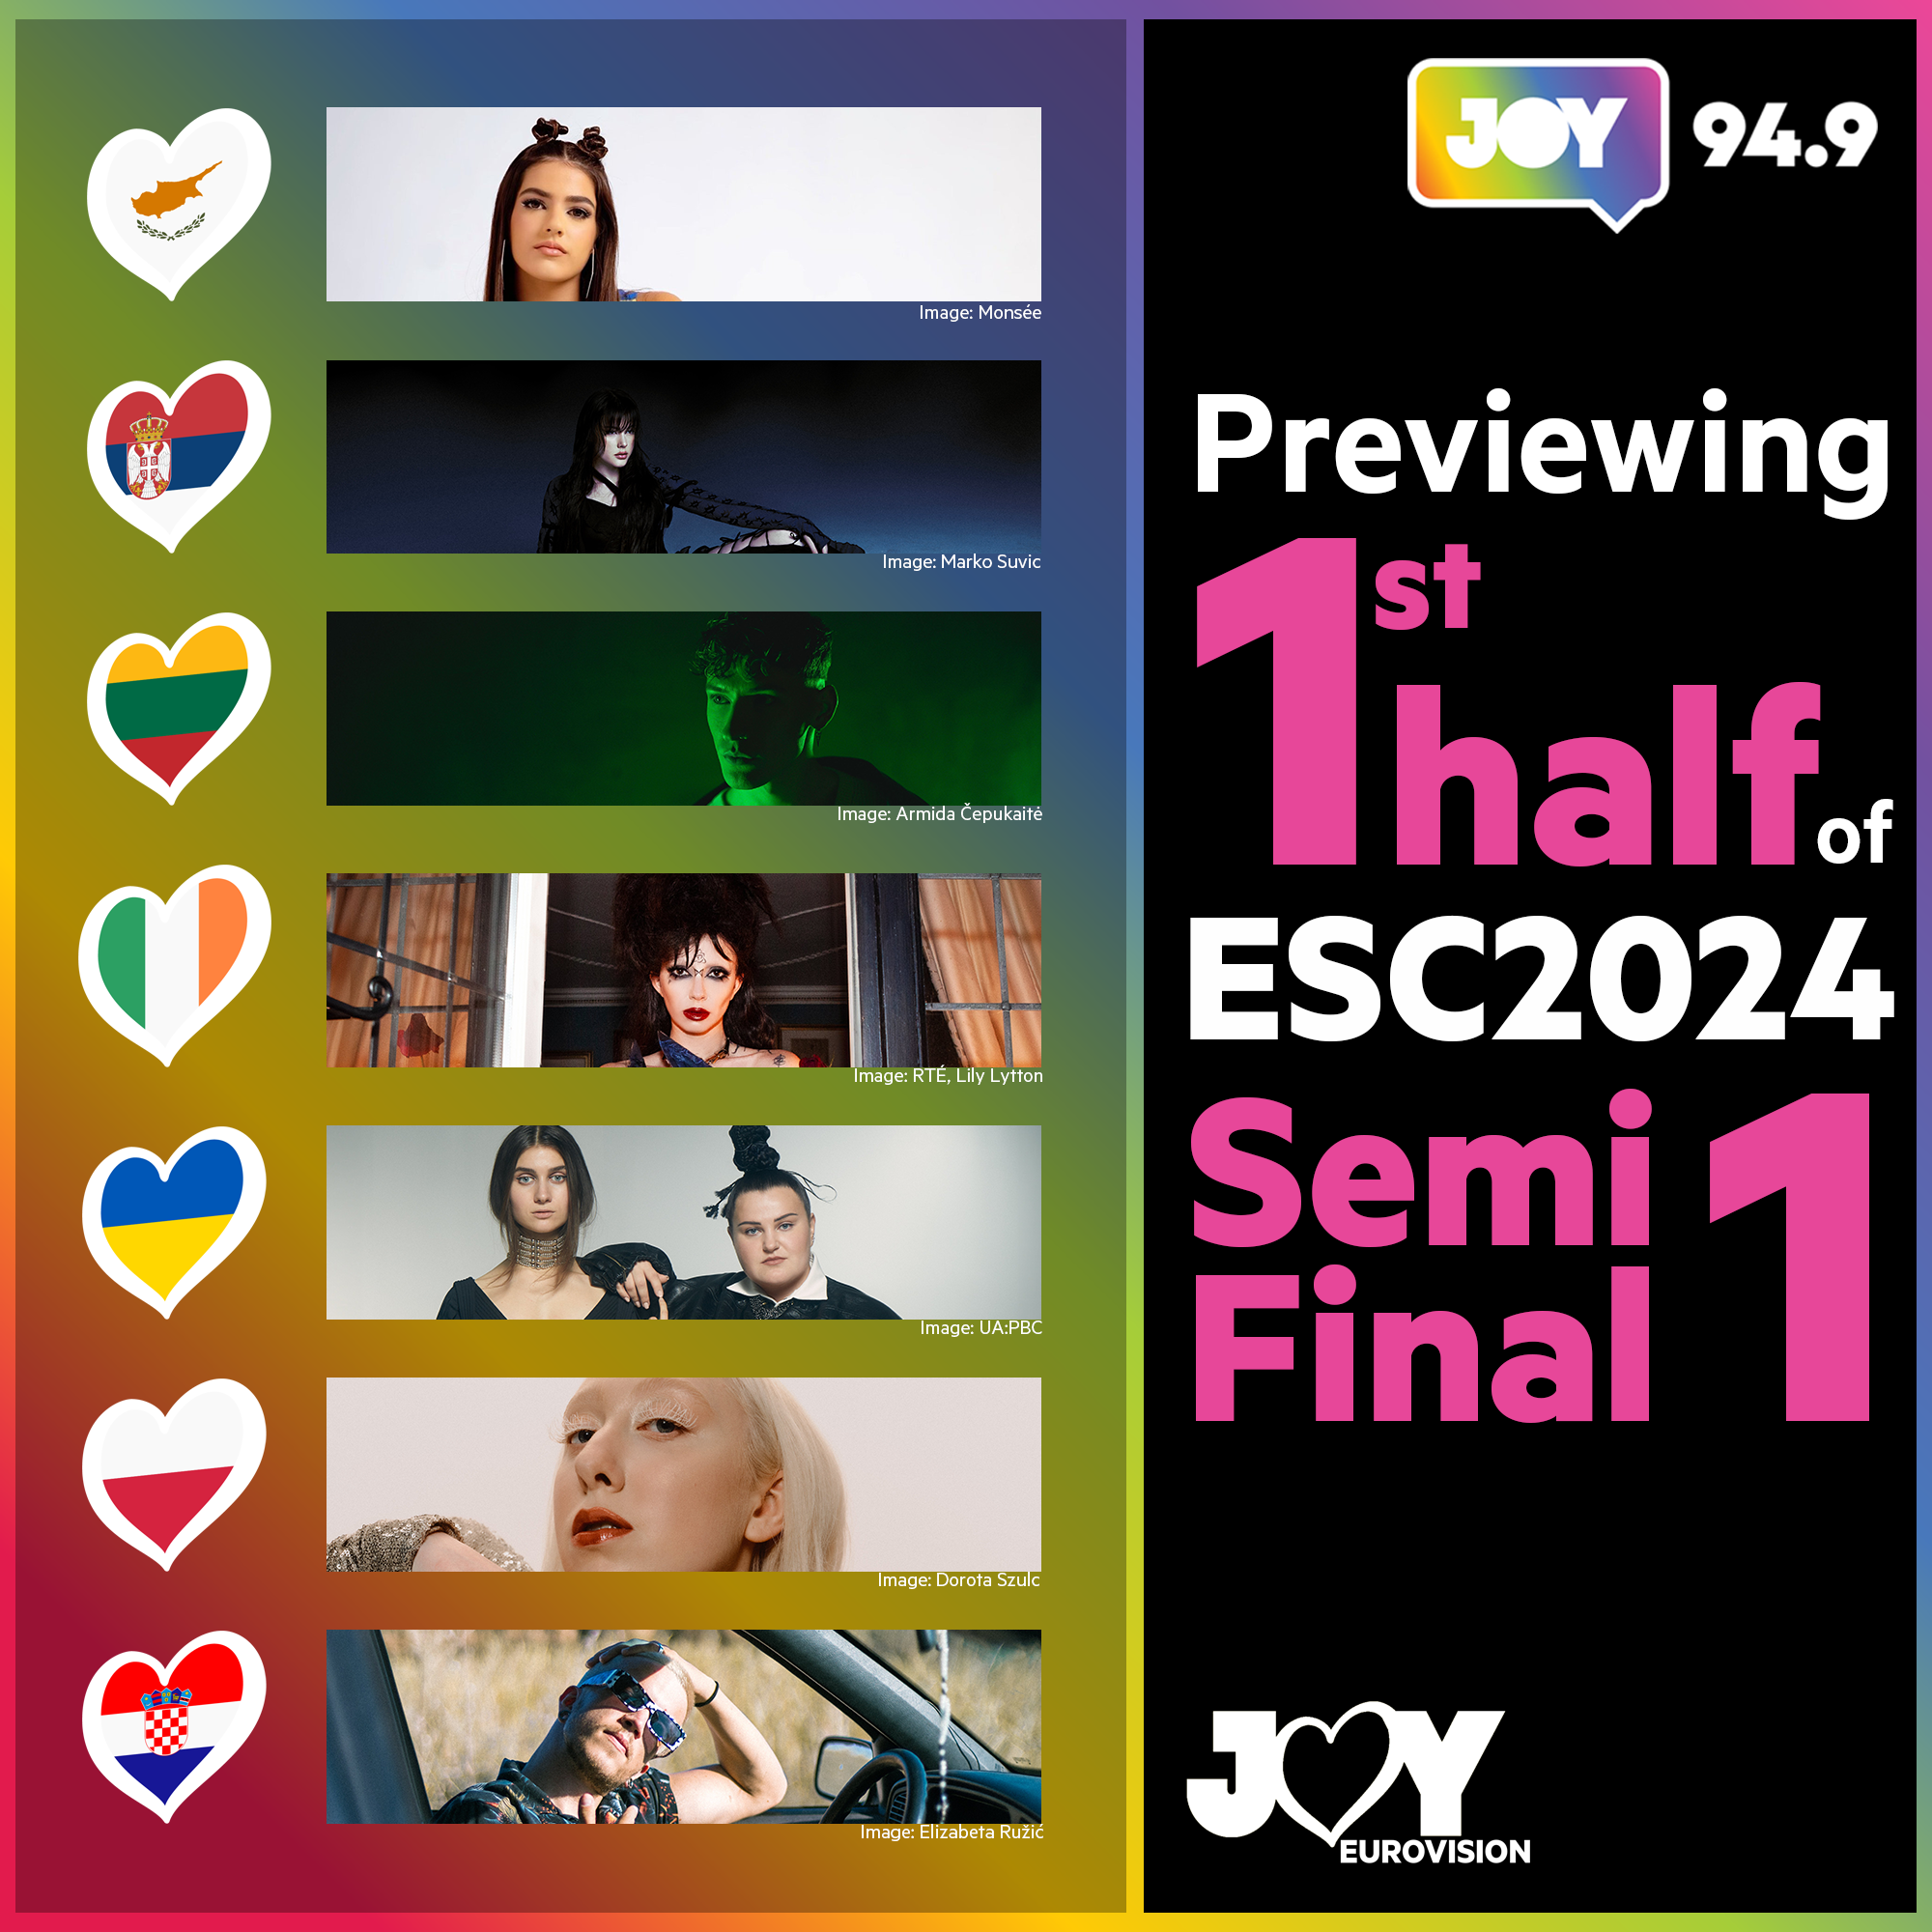 Previewing the first half of Eurovision 2024 Semi Final 1